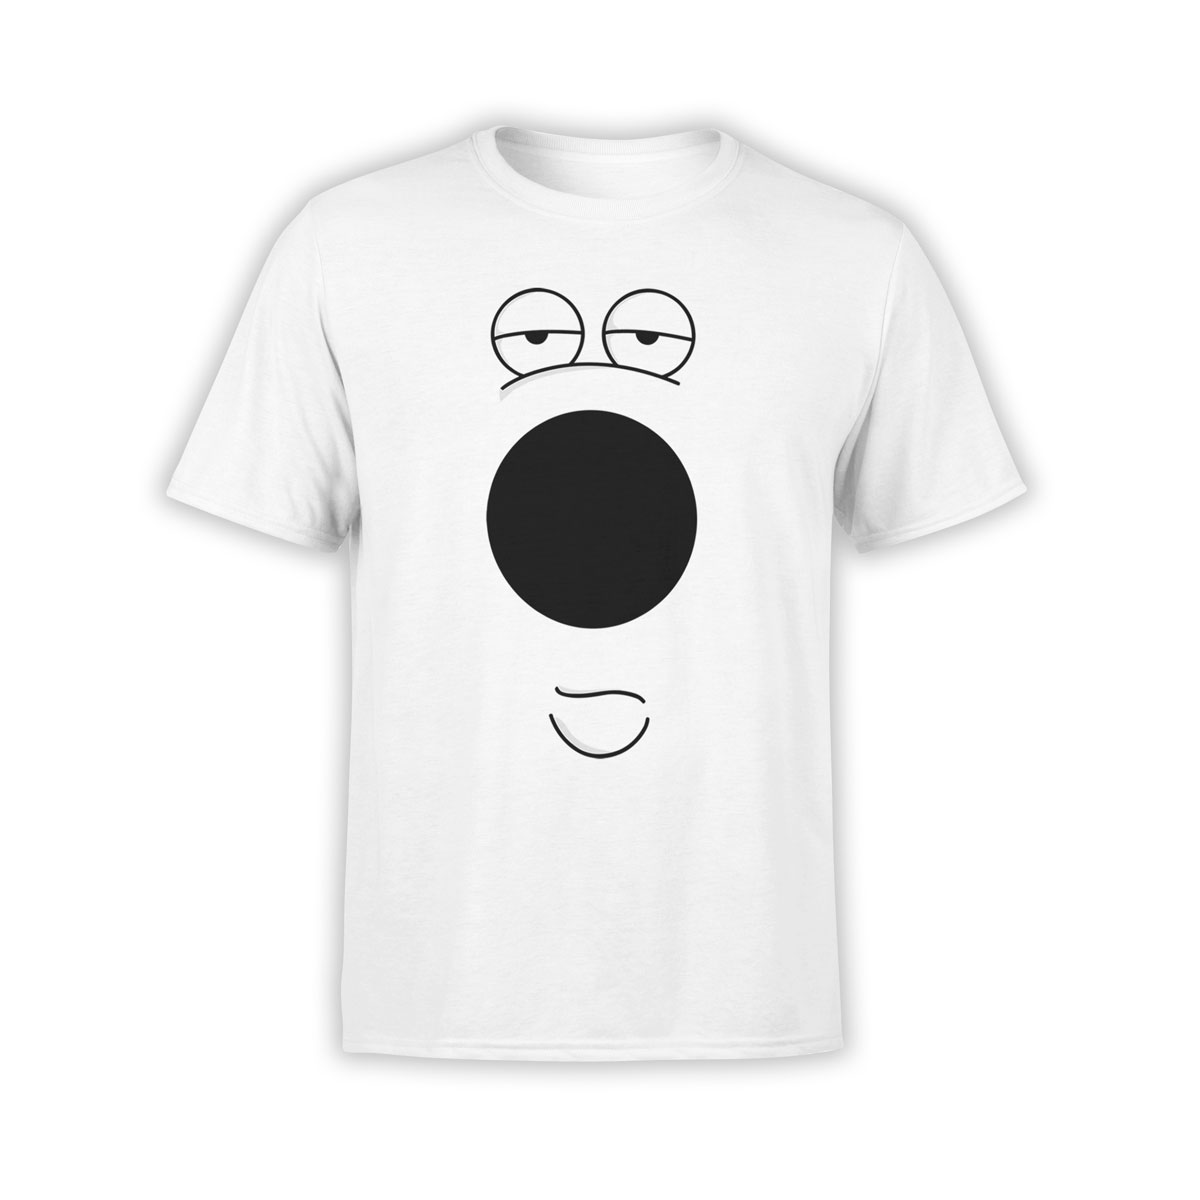 Family Guy T-Shirts. "Brian Griffin" Unisex 100% Ultra Cotton.